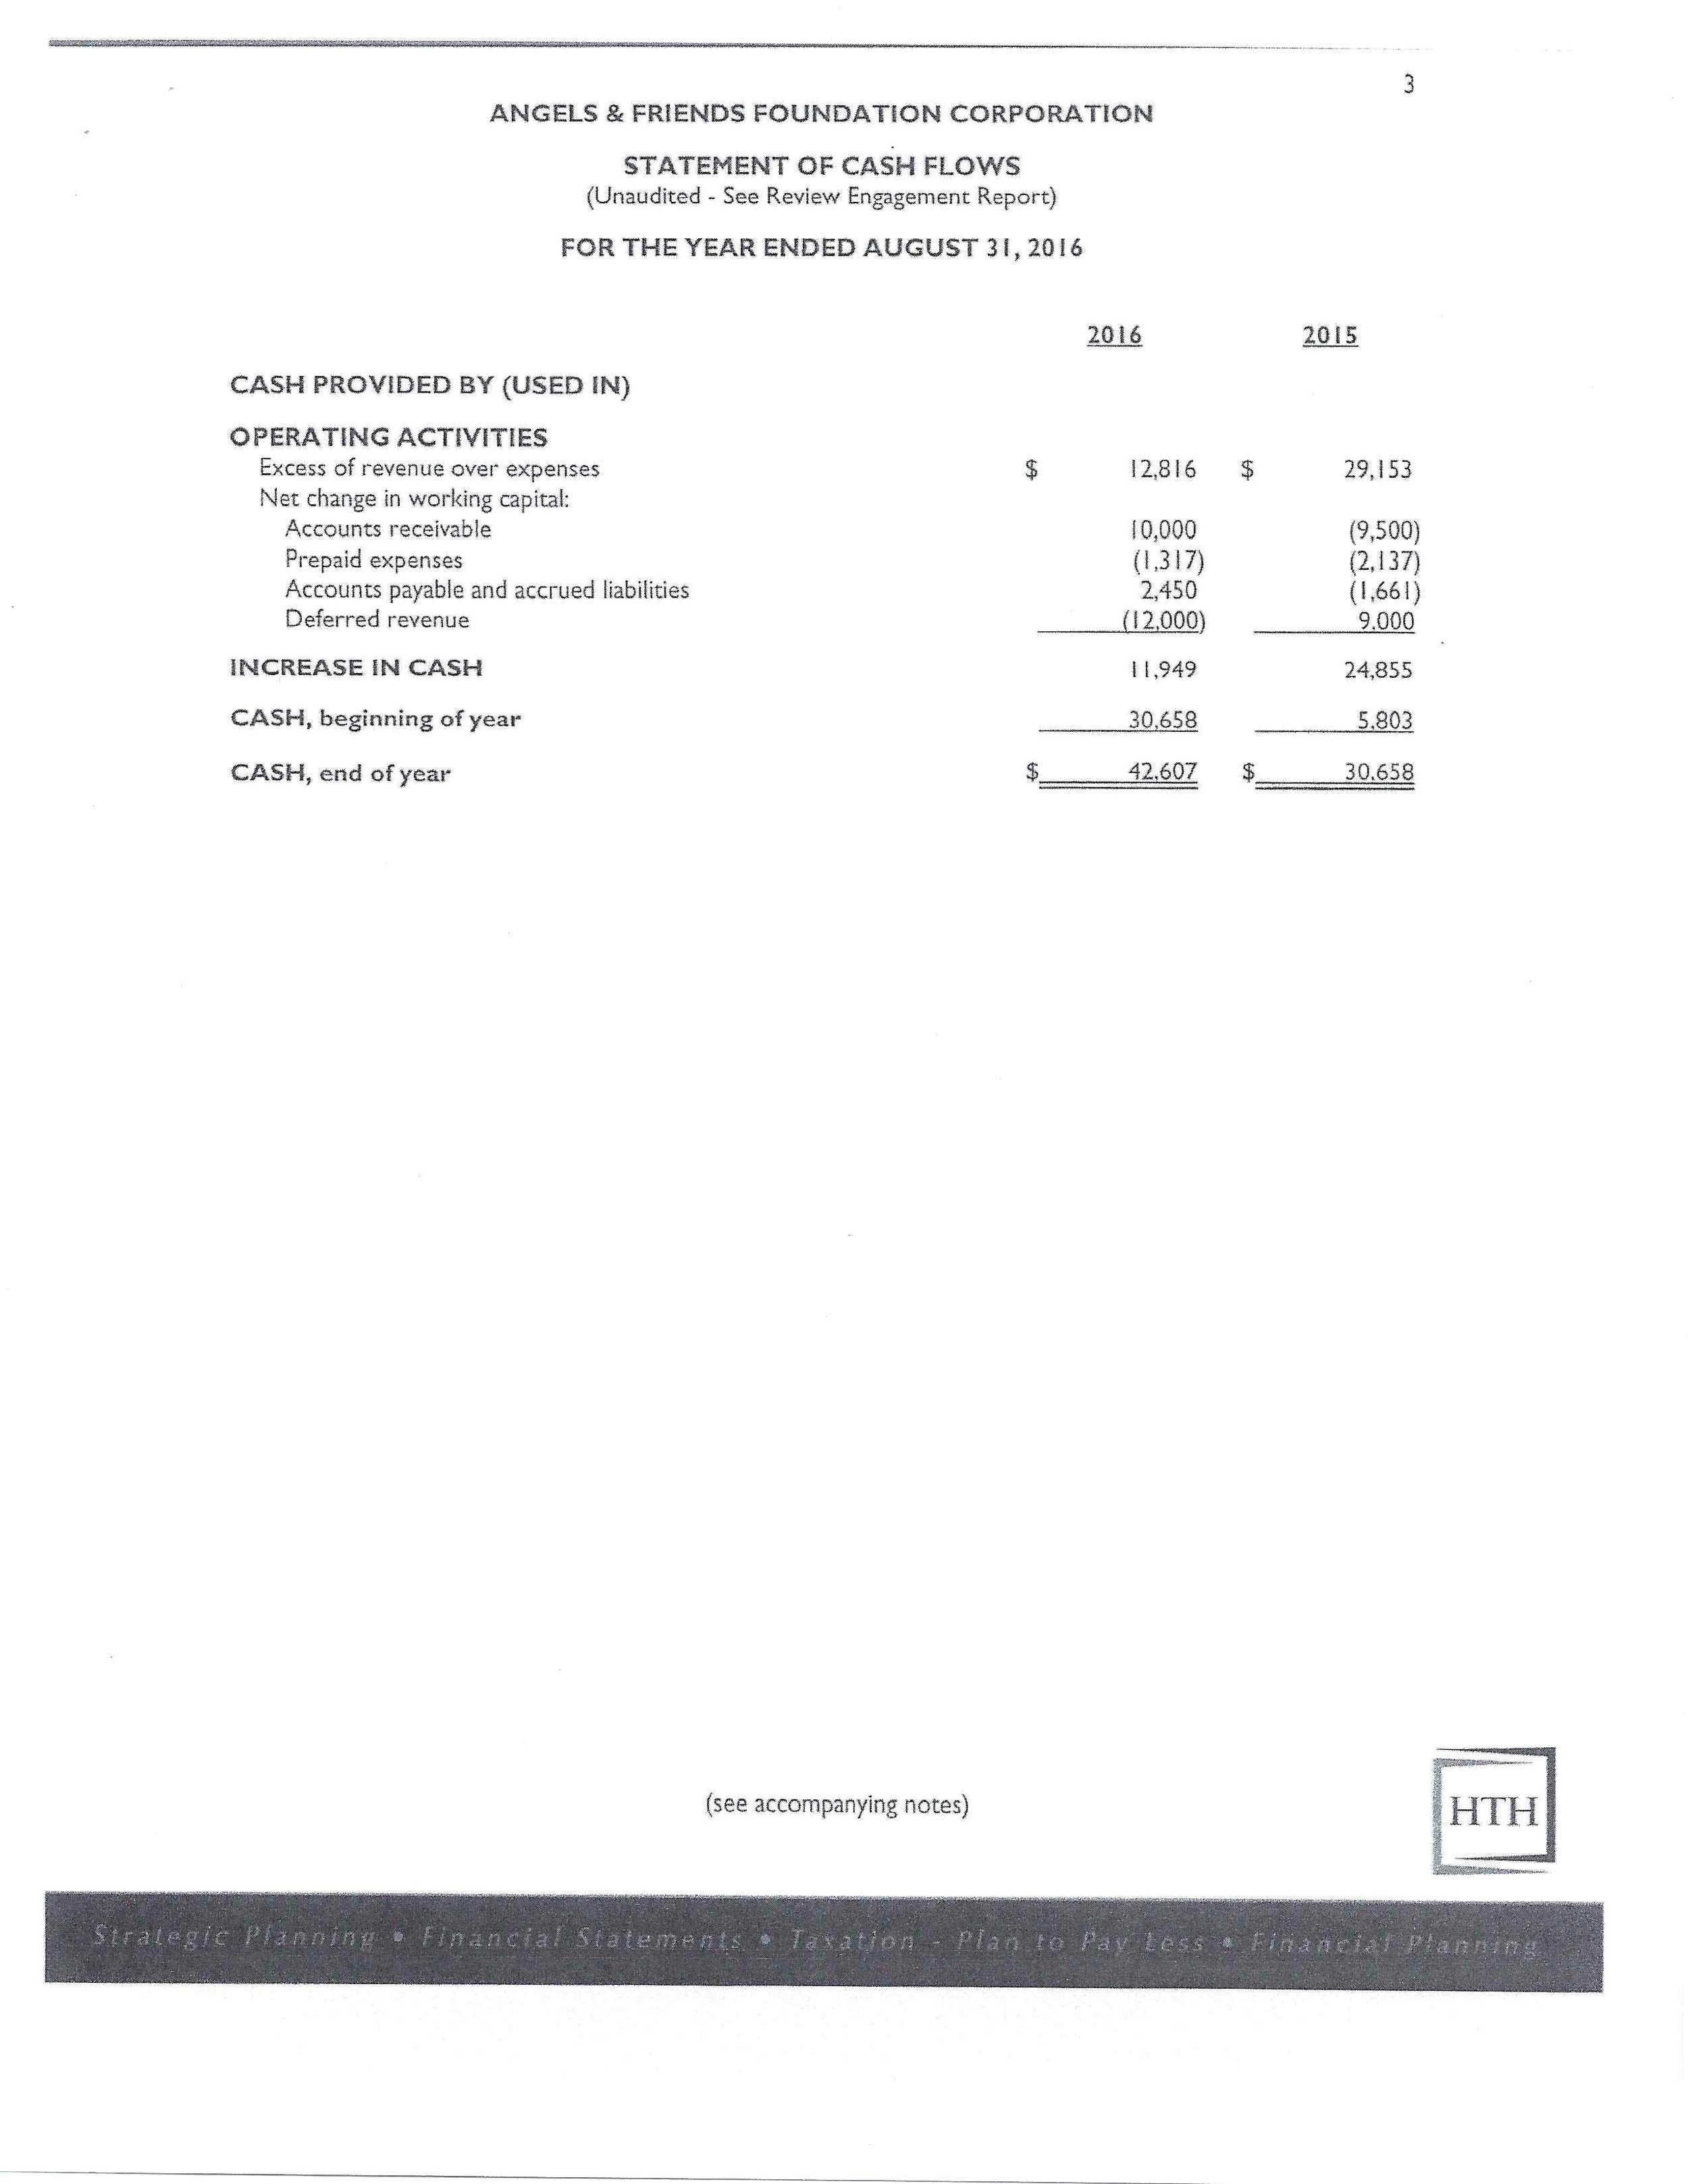 A&F Financial Statements- 2016_Page_5.jpg